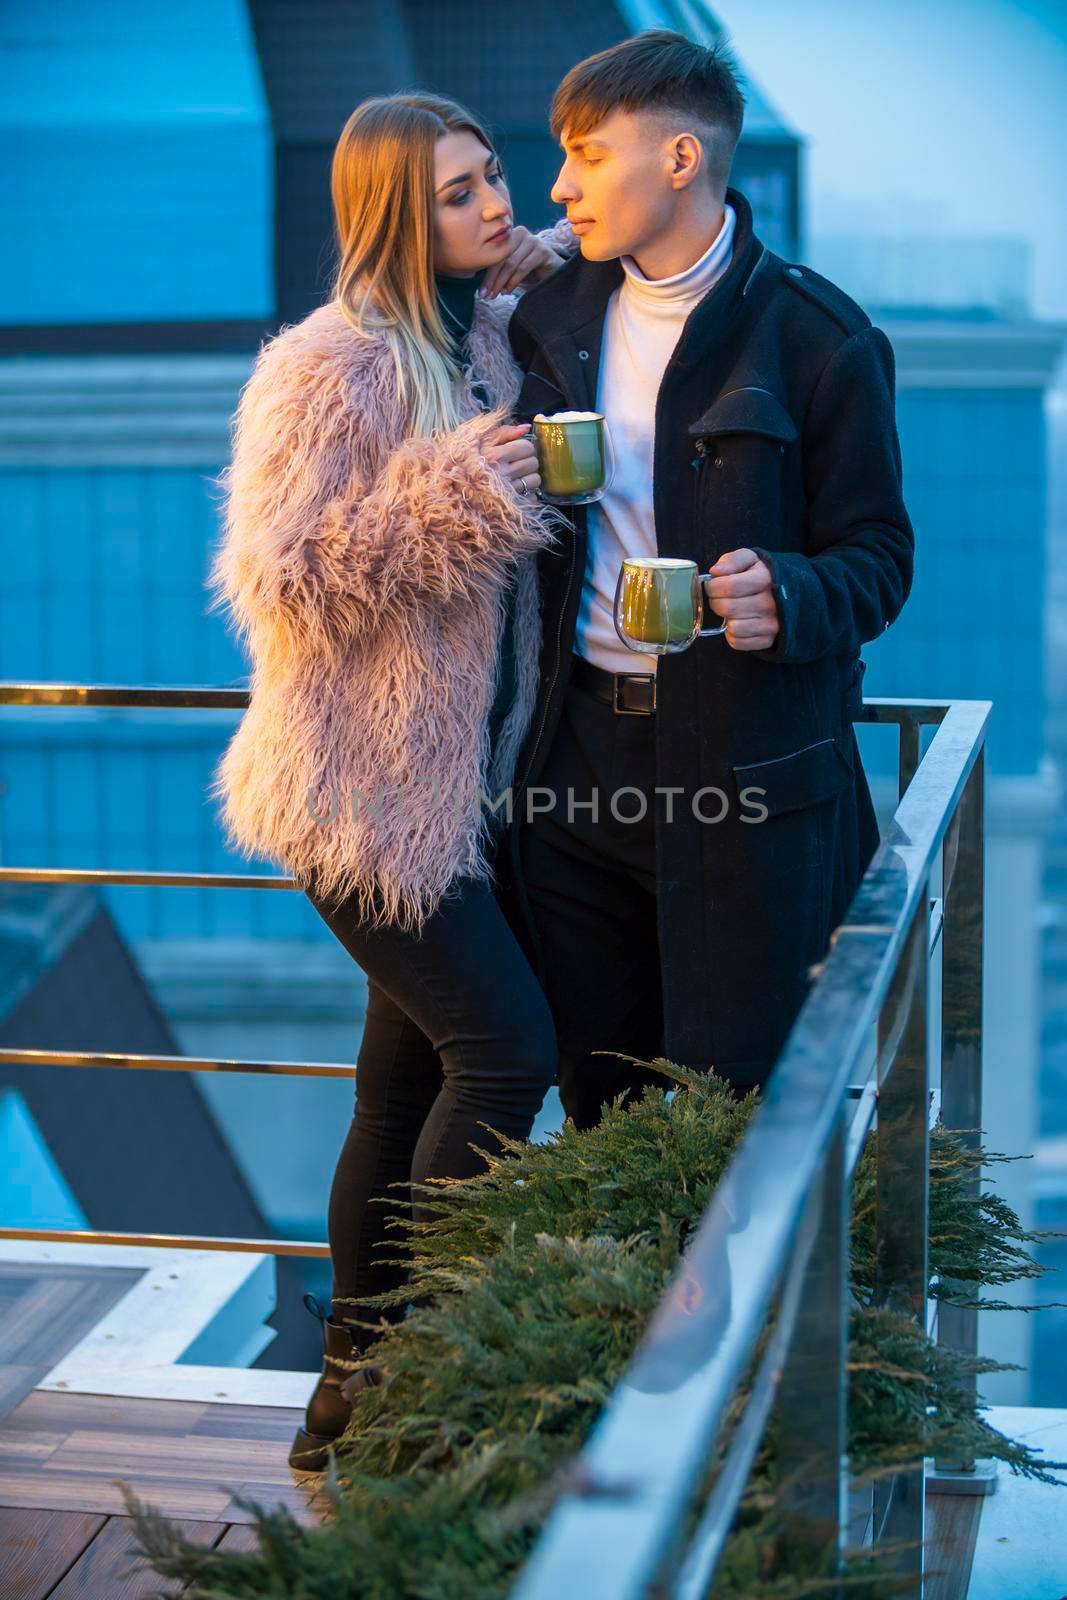 couple with mugs on the terrace of a high-rise building by zokov